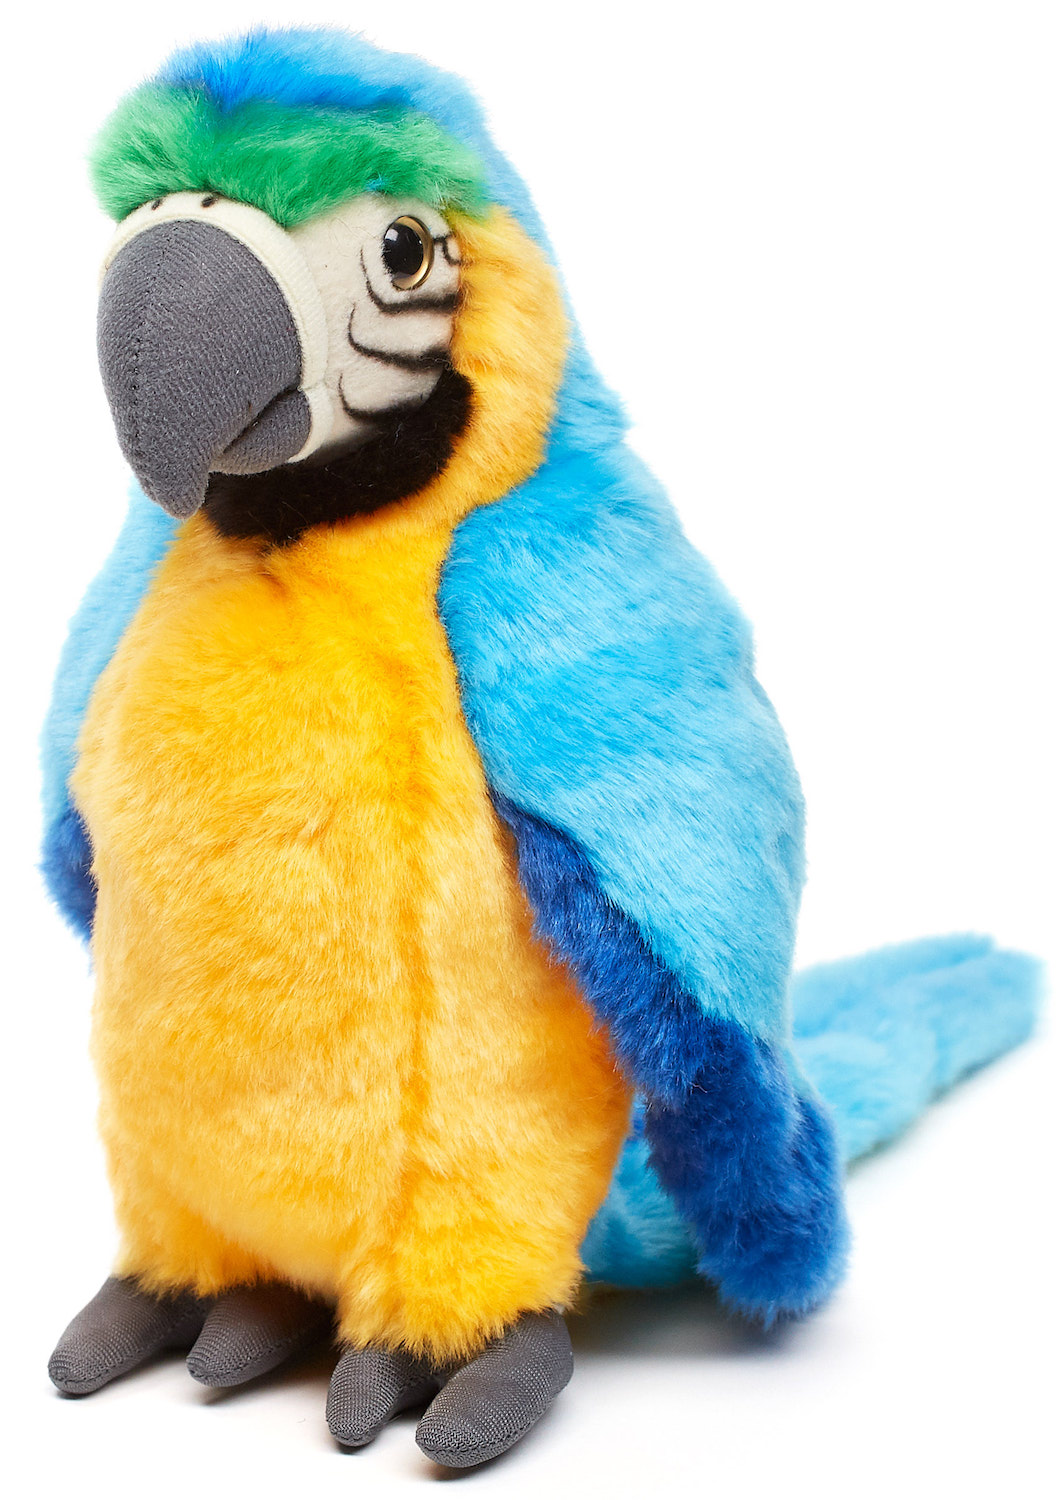 Parrot (blue) - 24 cm (height) - plush bird, macaw - soft toy, cuddly toy